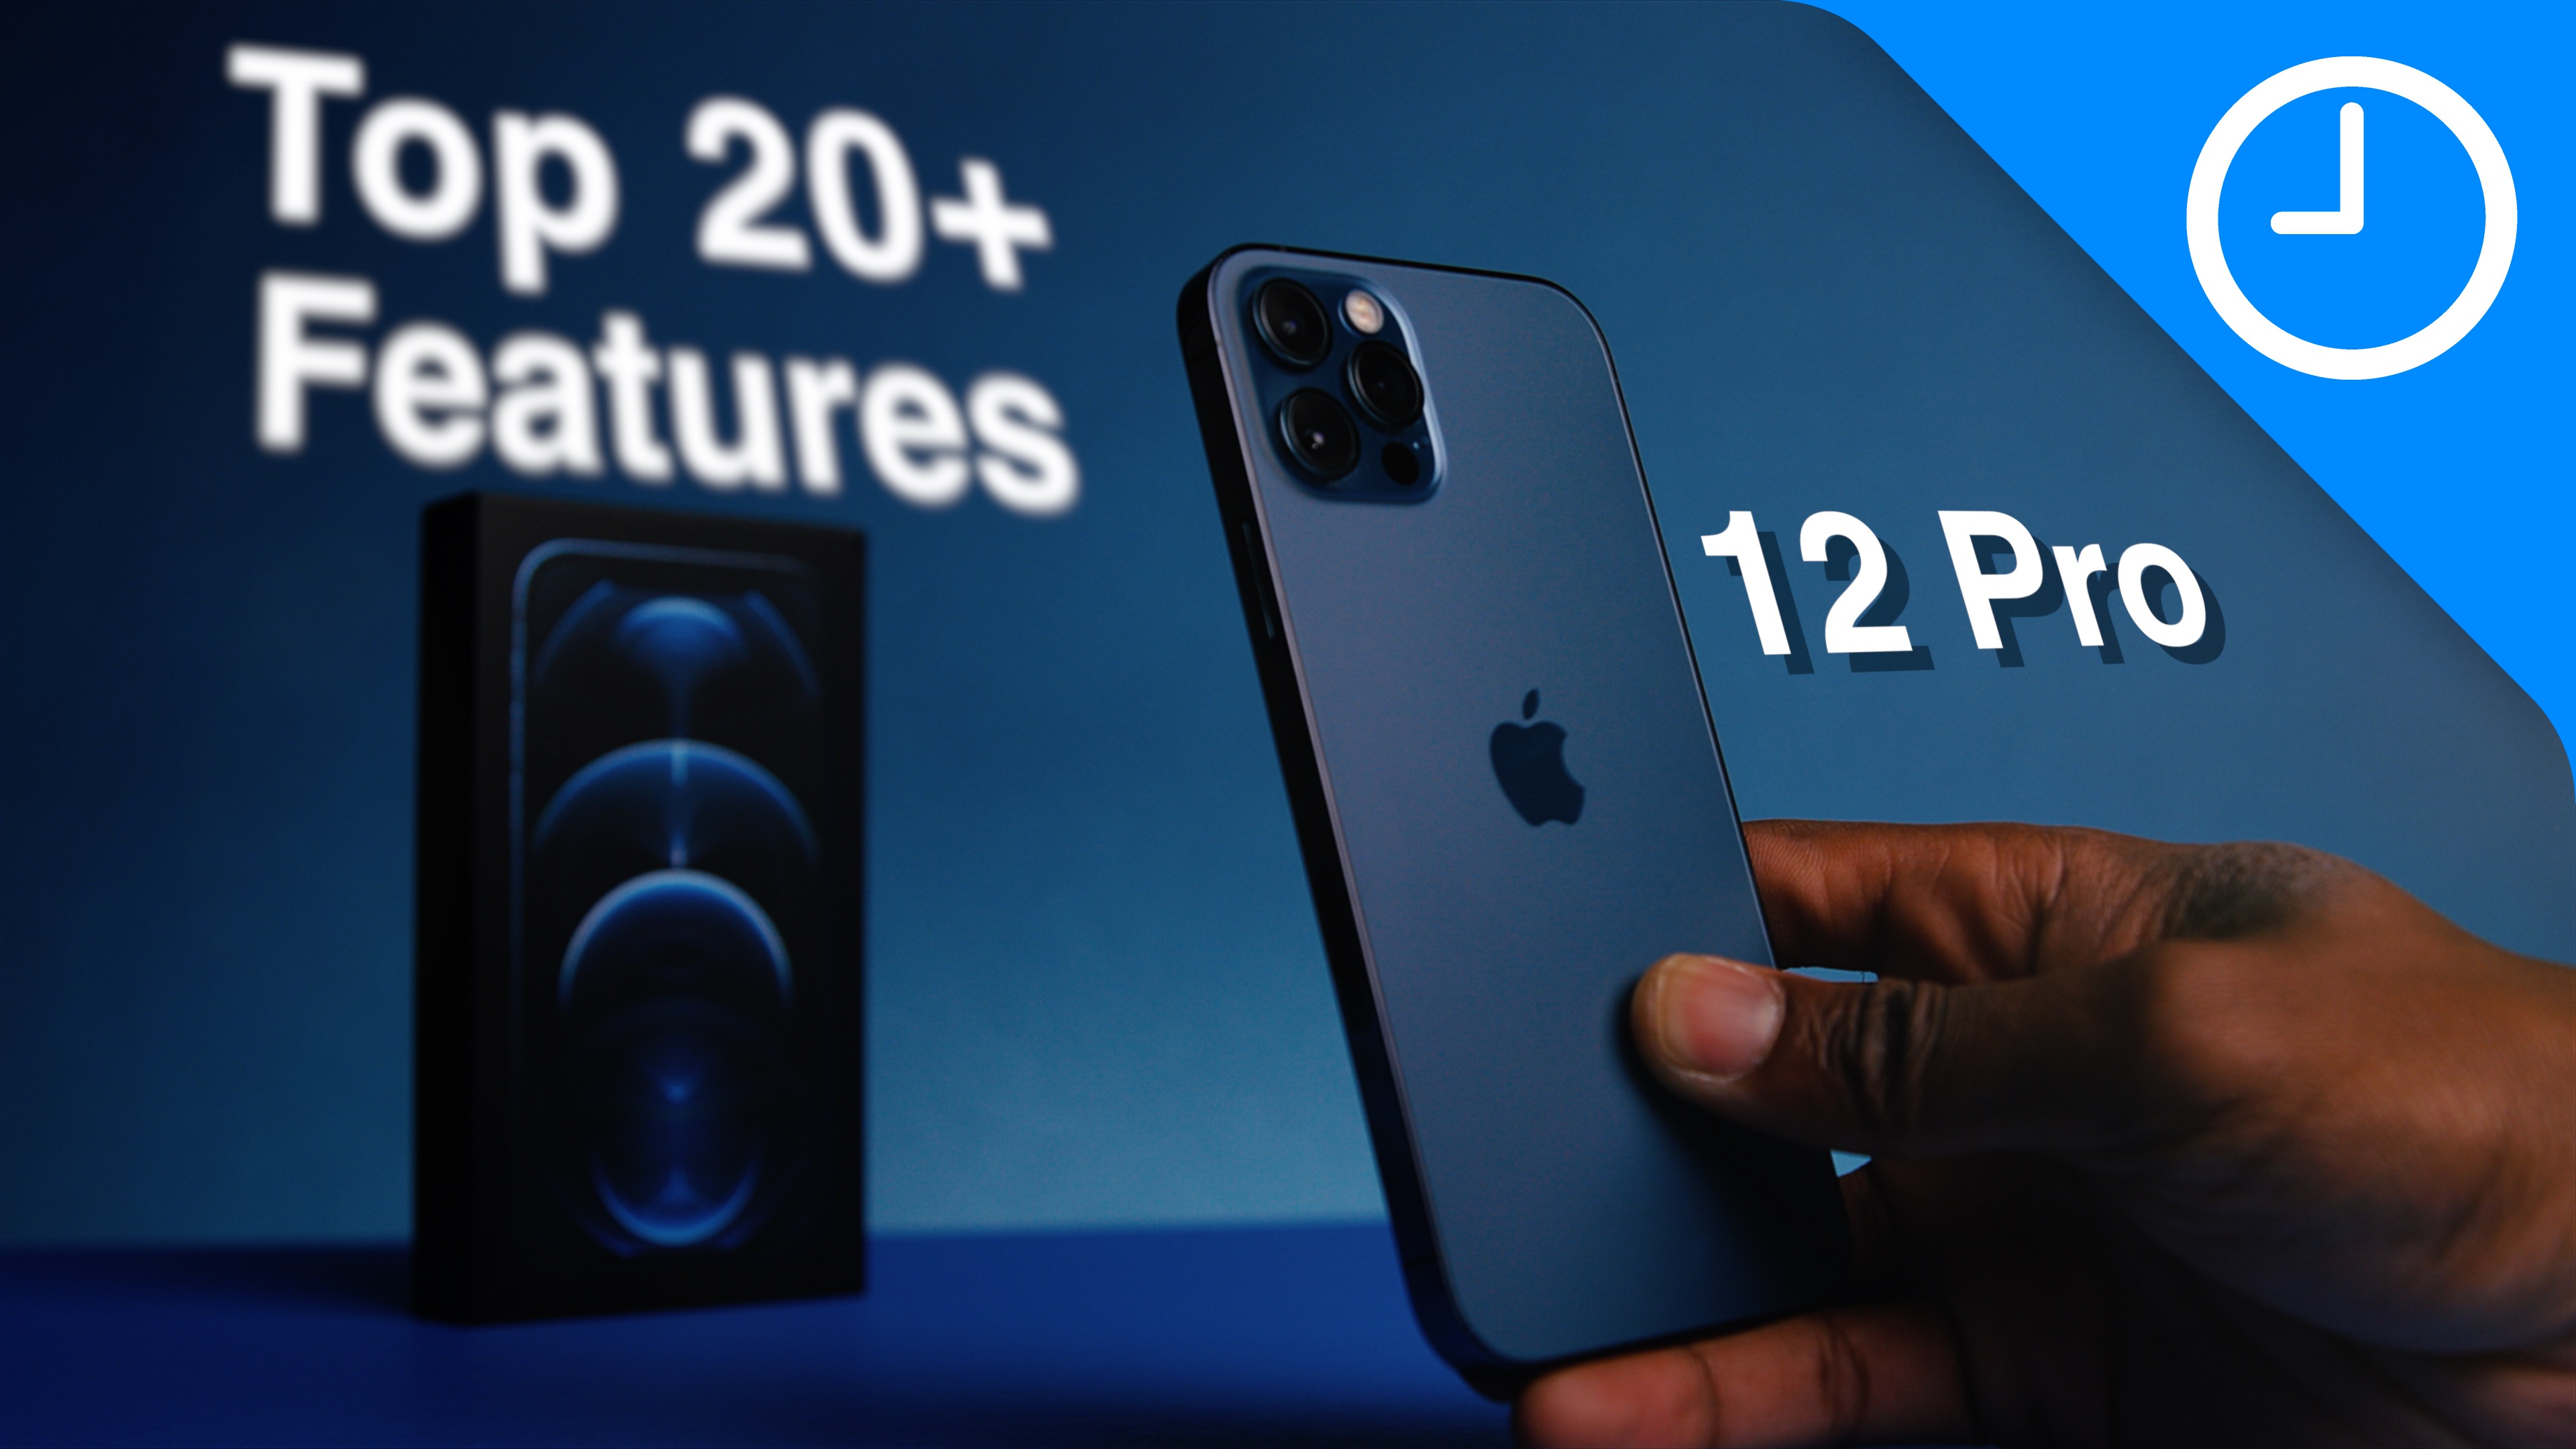 iPhone 12 Pro: Top features [Video] - 9to5Mac